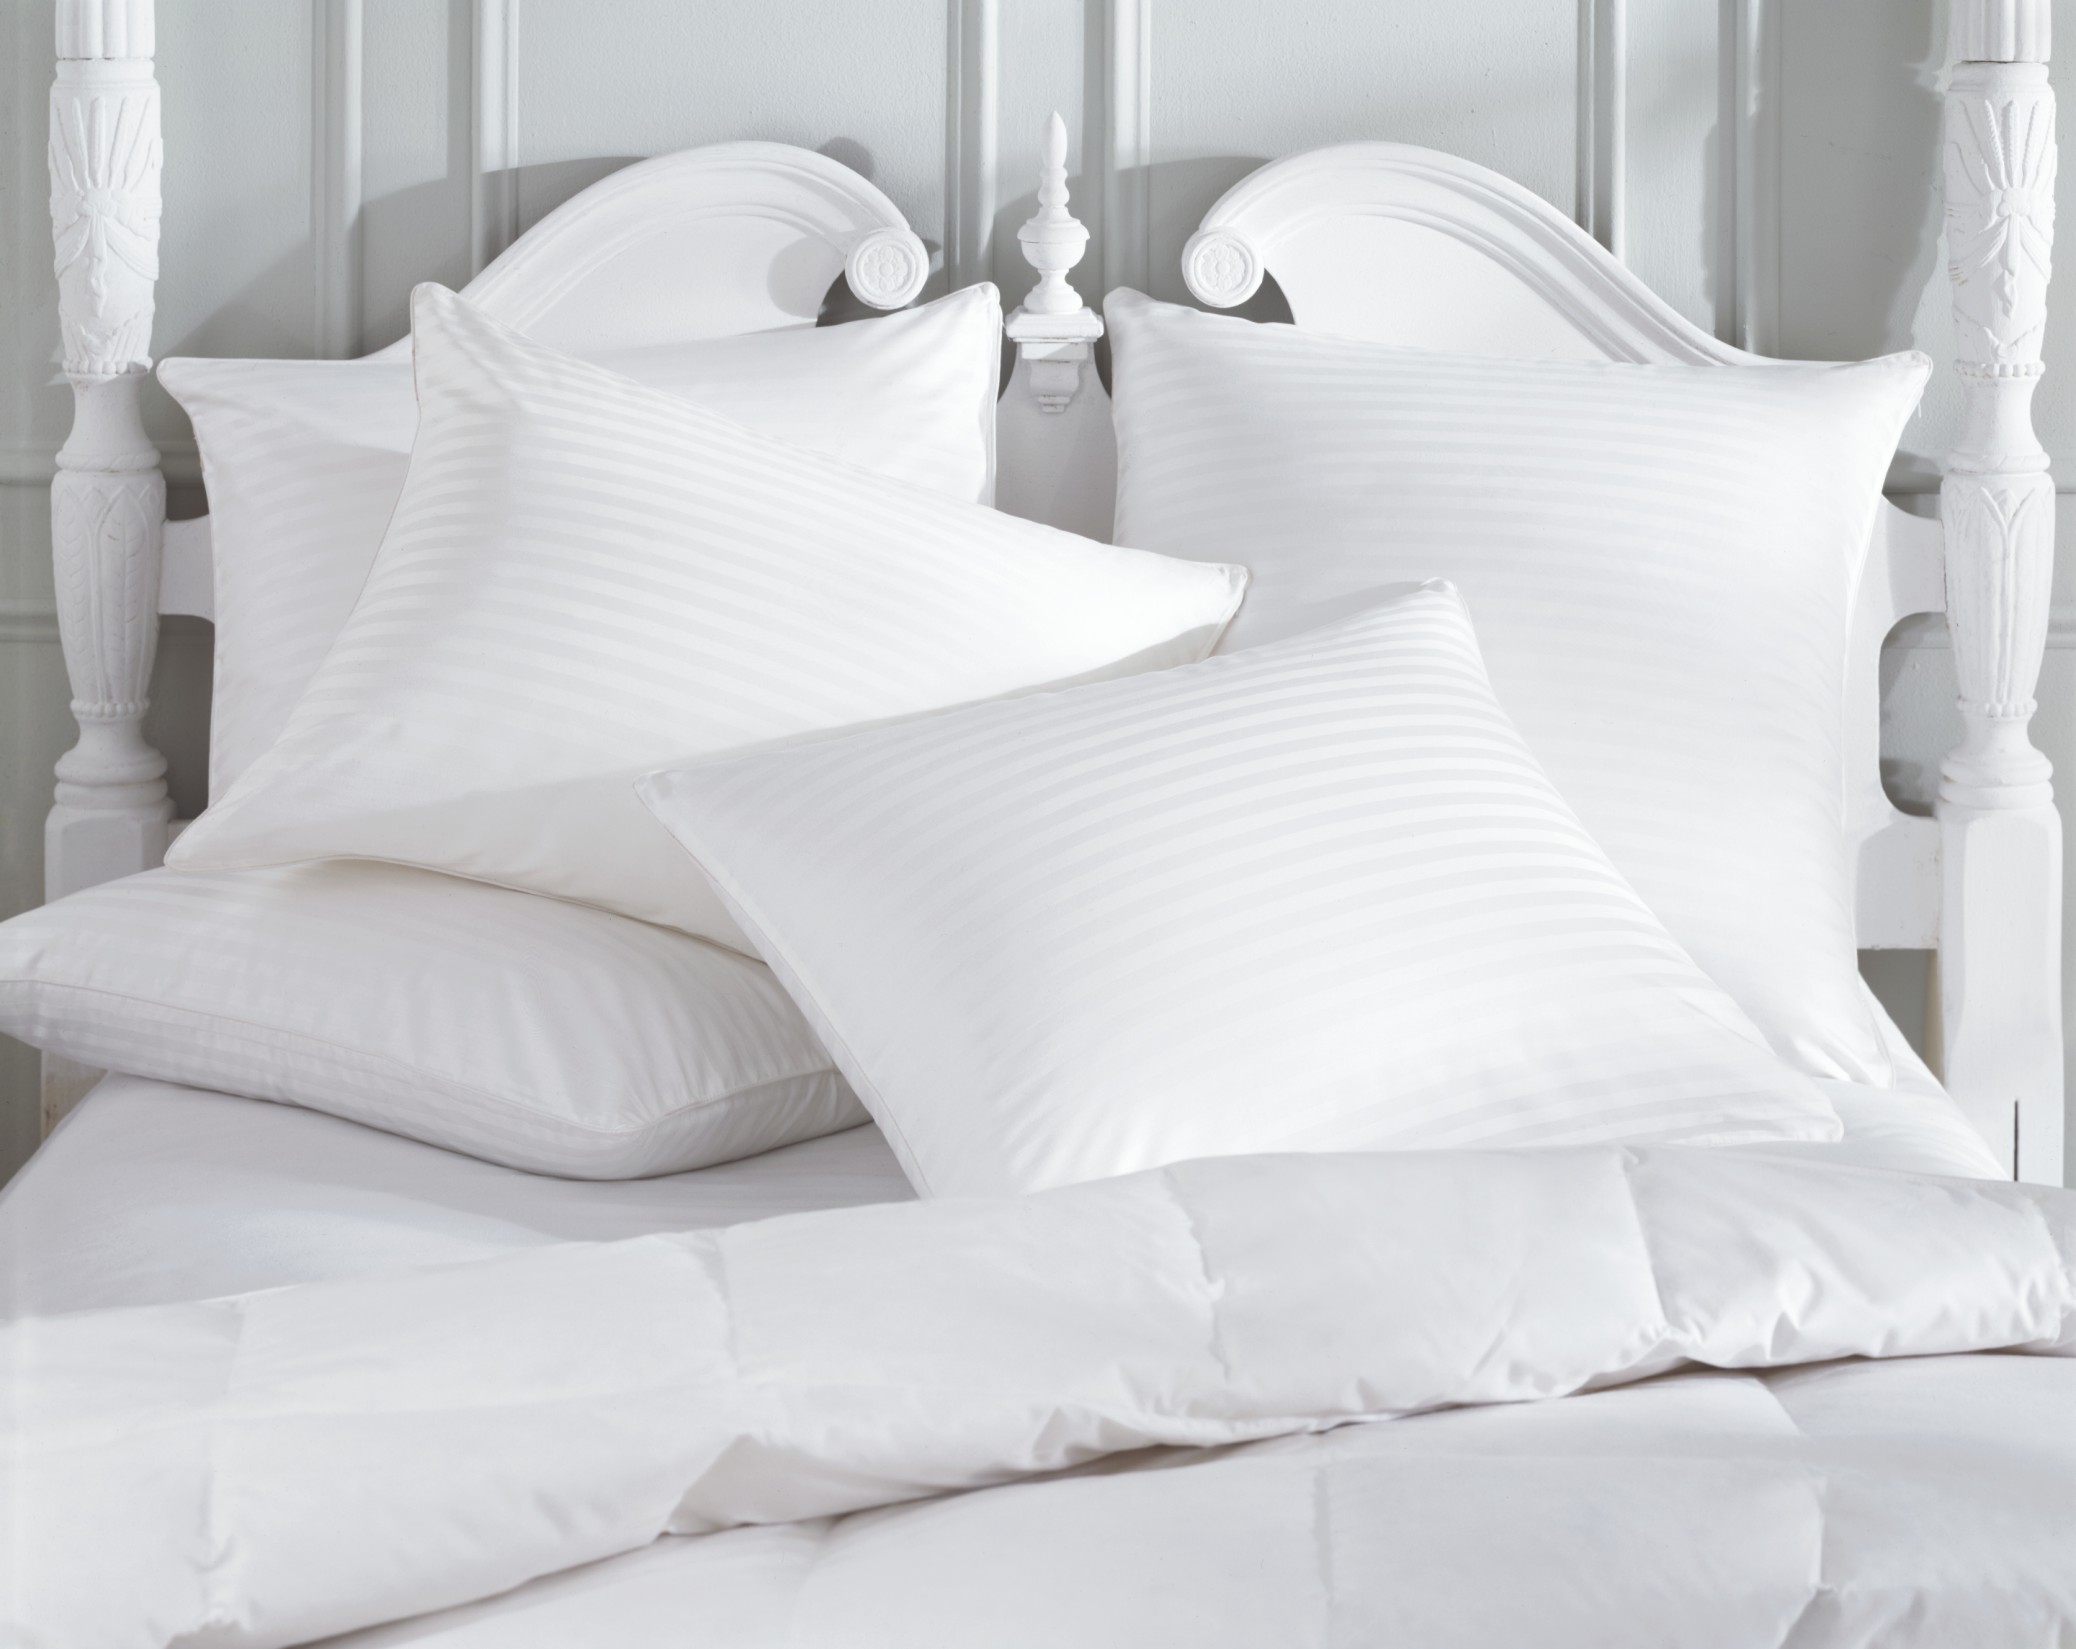 Clean and healthy pillows